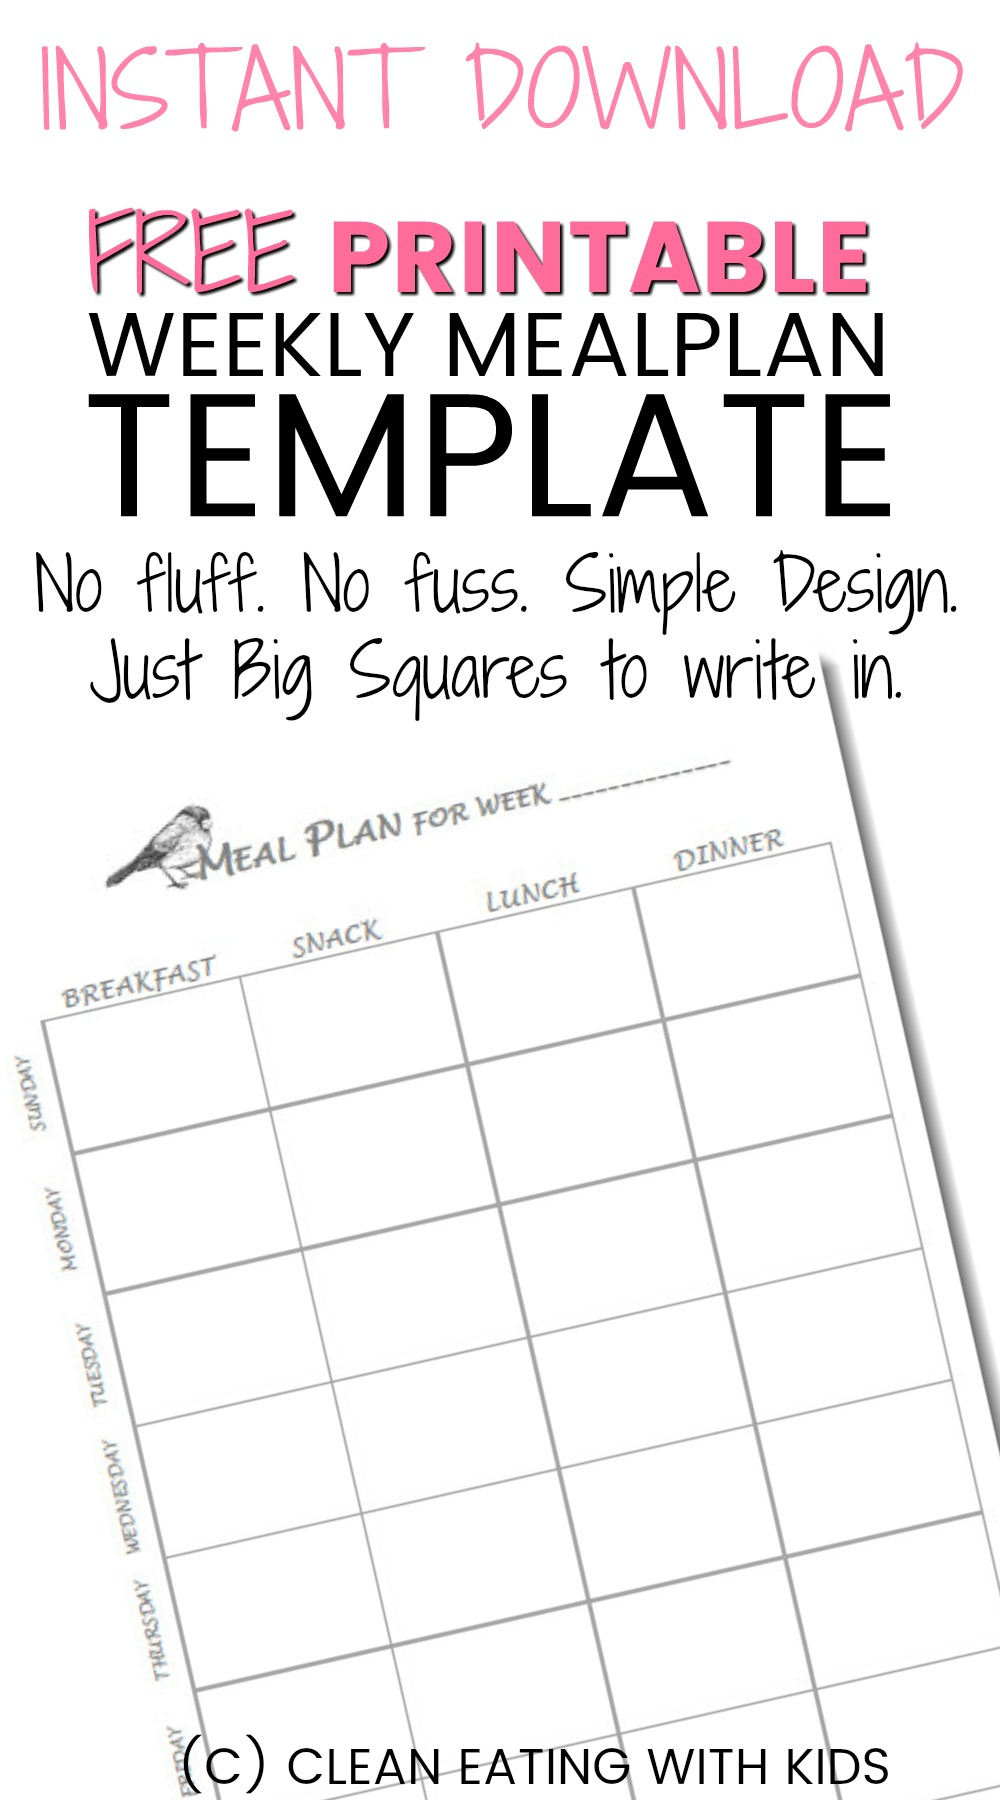 Free Printable Weekly Meal Plan Template - Clean Eating With Kids - Design A Menu For Free Printable